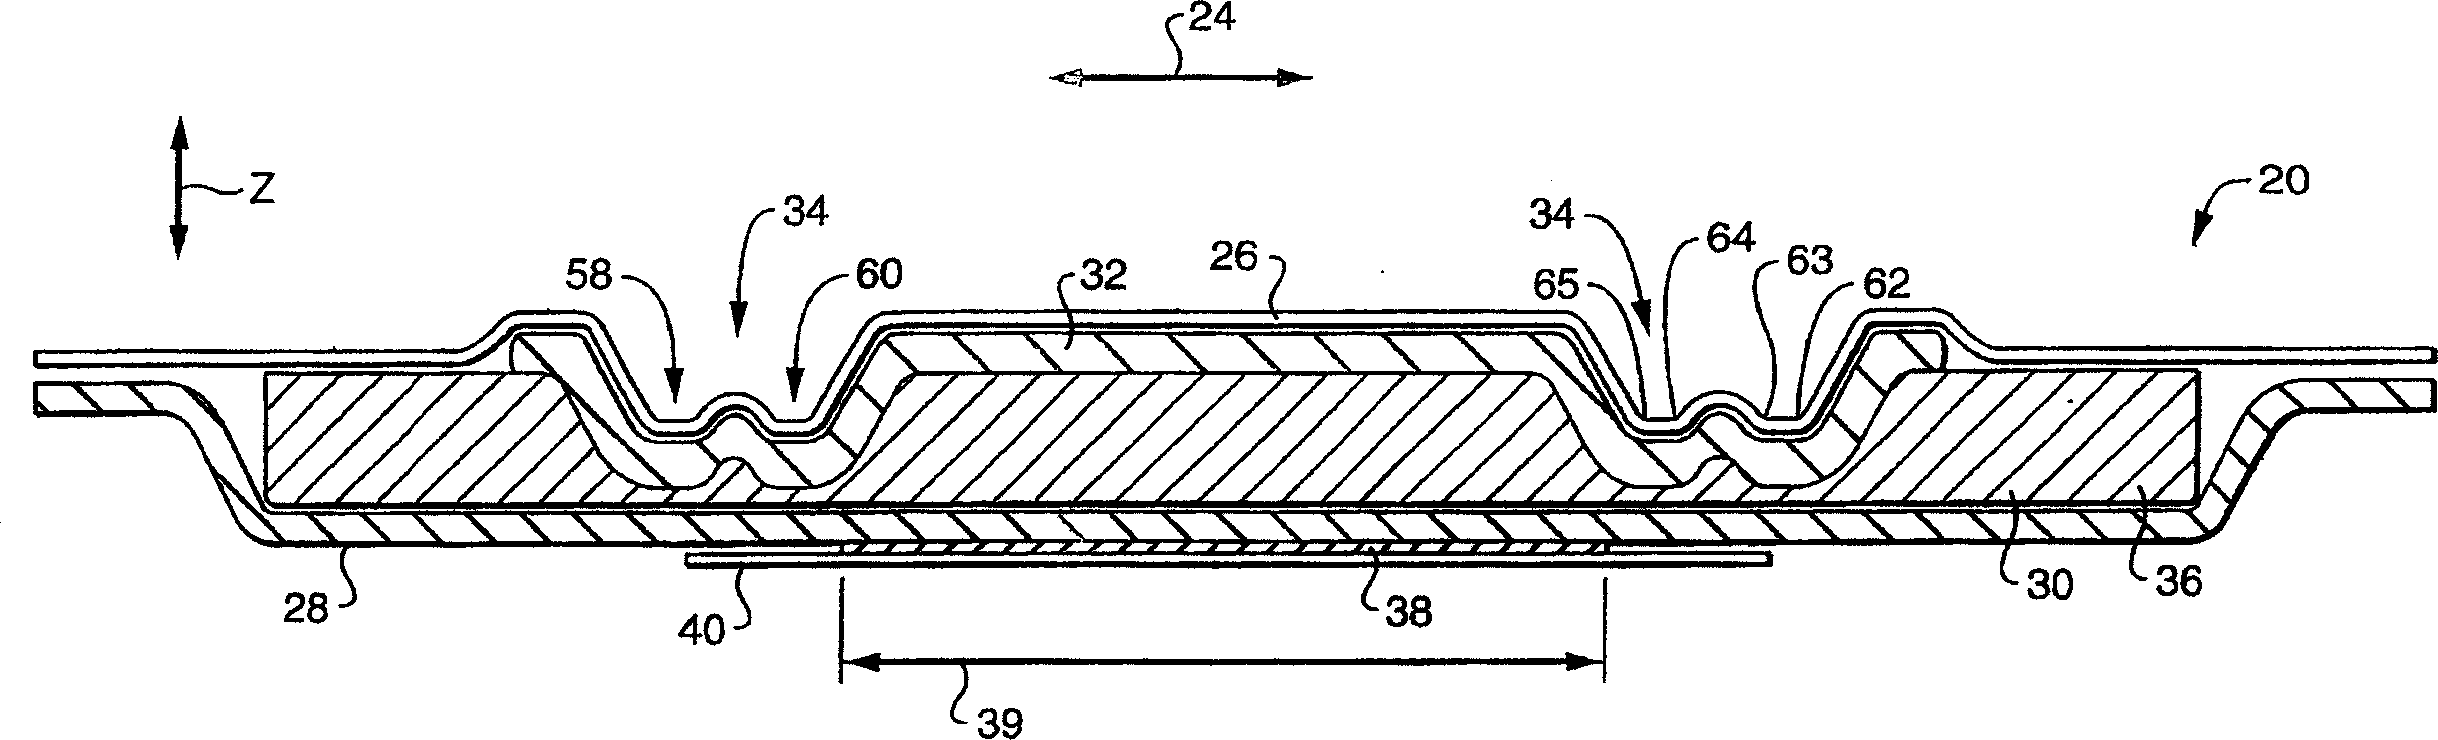 An absorbent article with an embossment along the perimeter